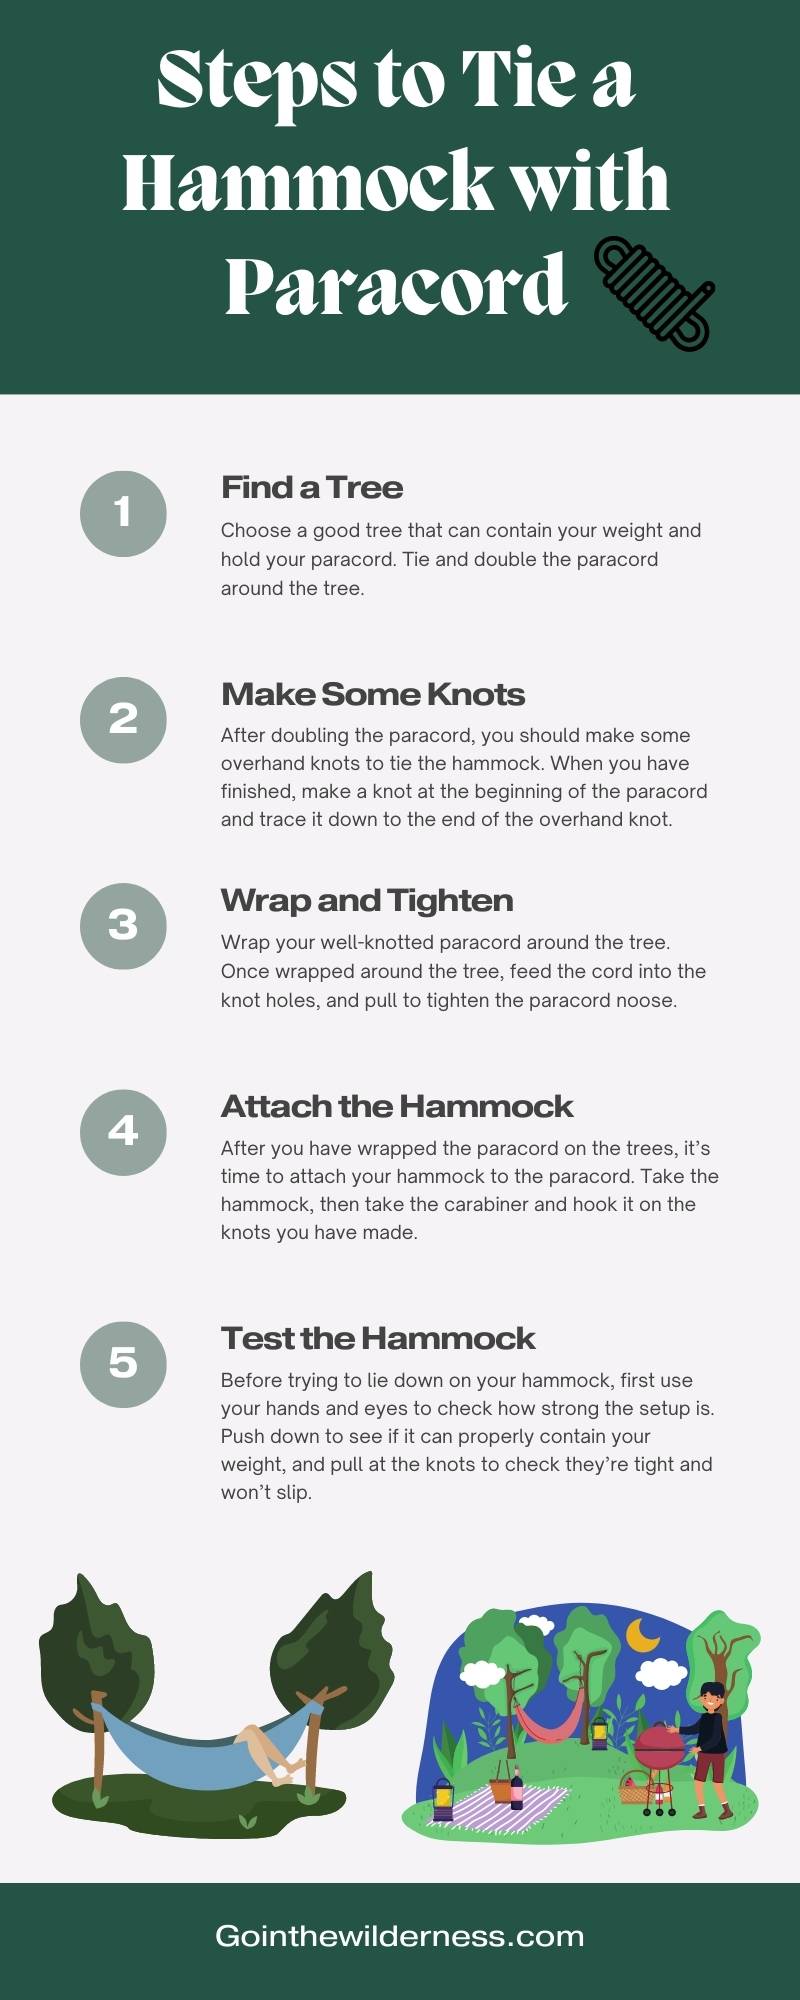 Steps to Tie a Hammock with Paracord